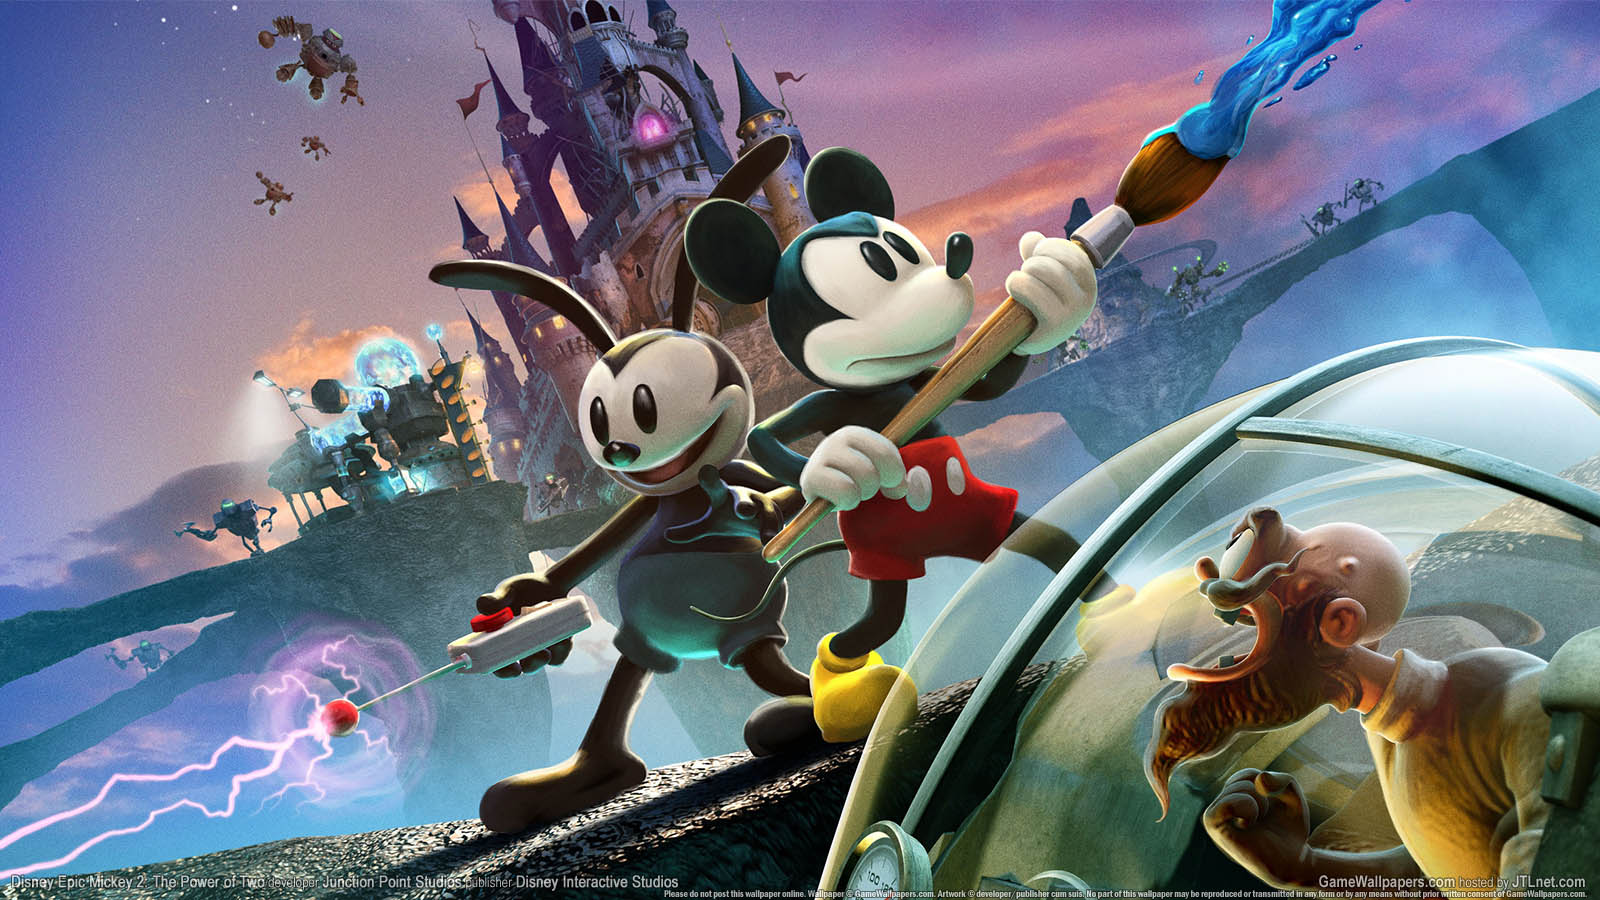 Disney Epic Mickey 2%3A The Power of Two wallpaper 01 1600x900